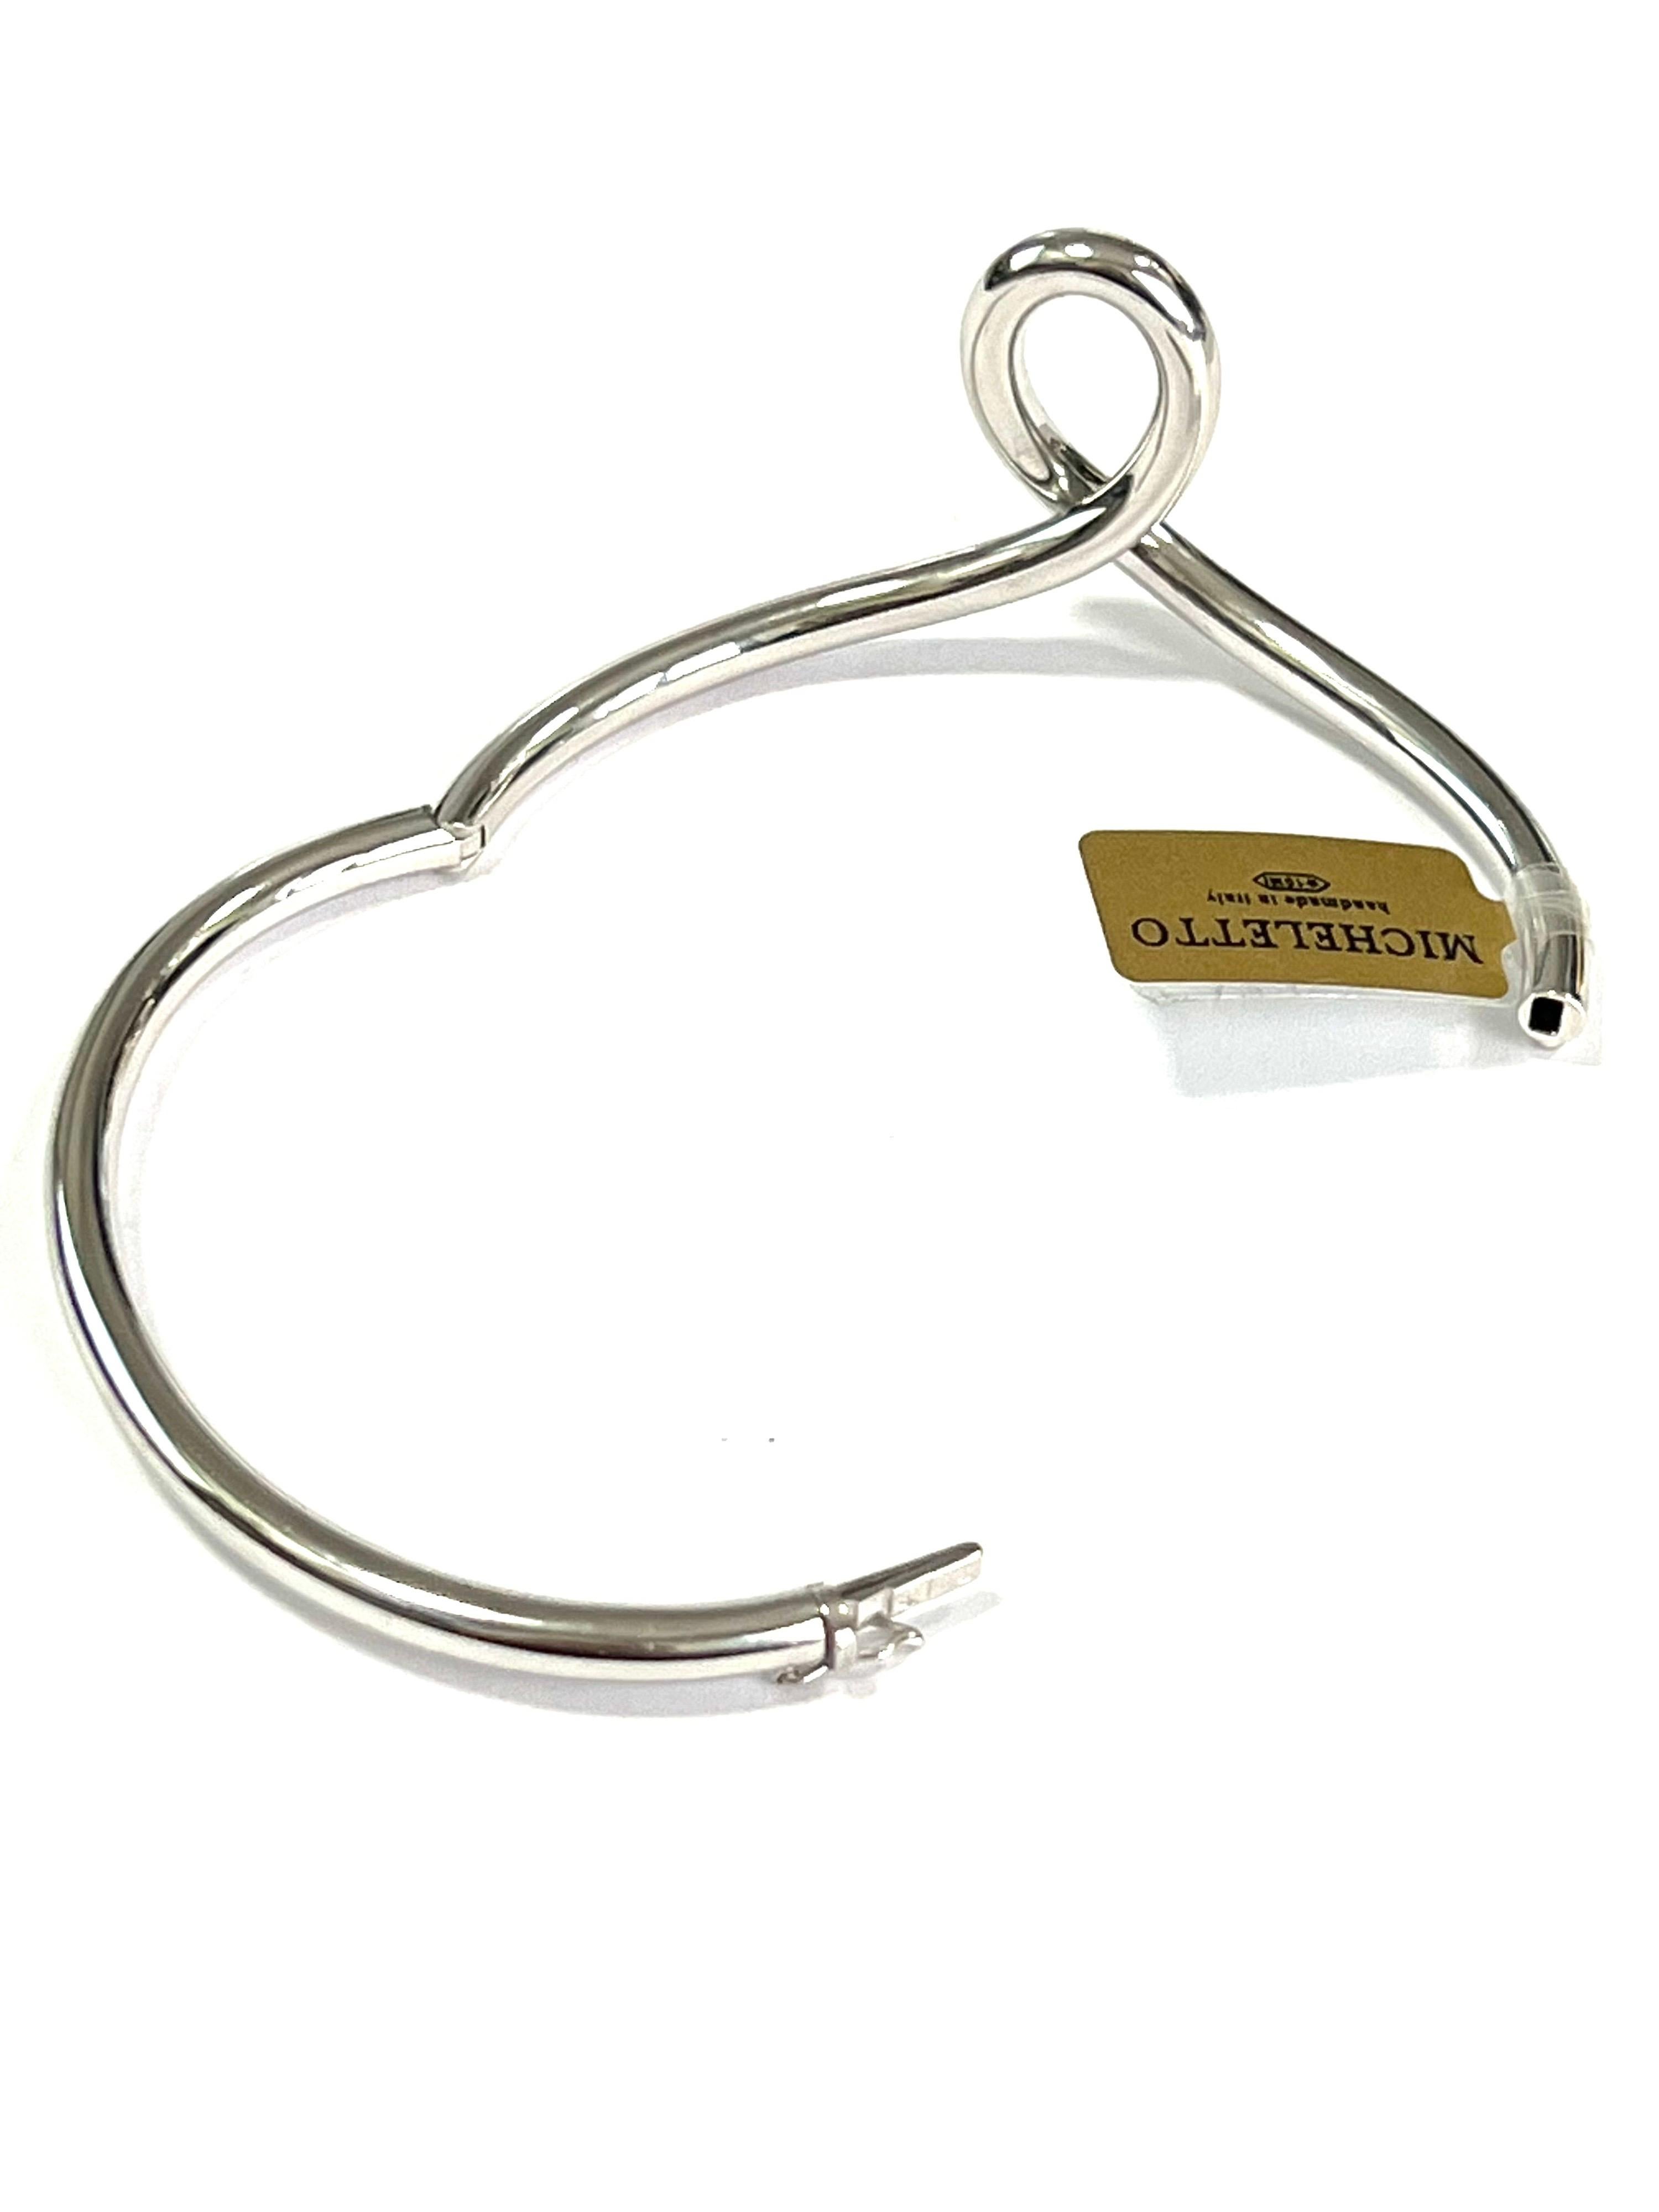 Women's Bangle from the Collection 